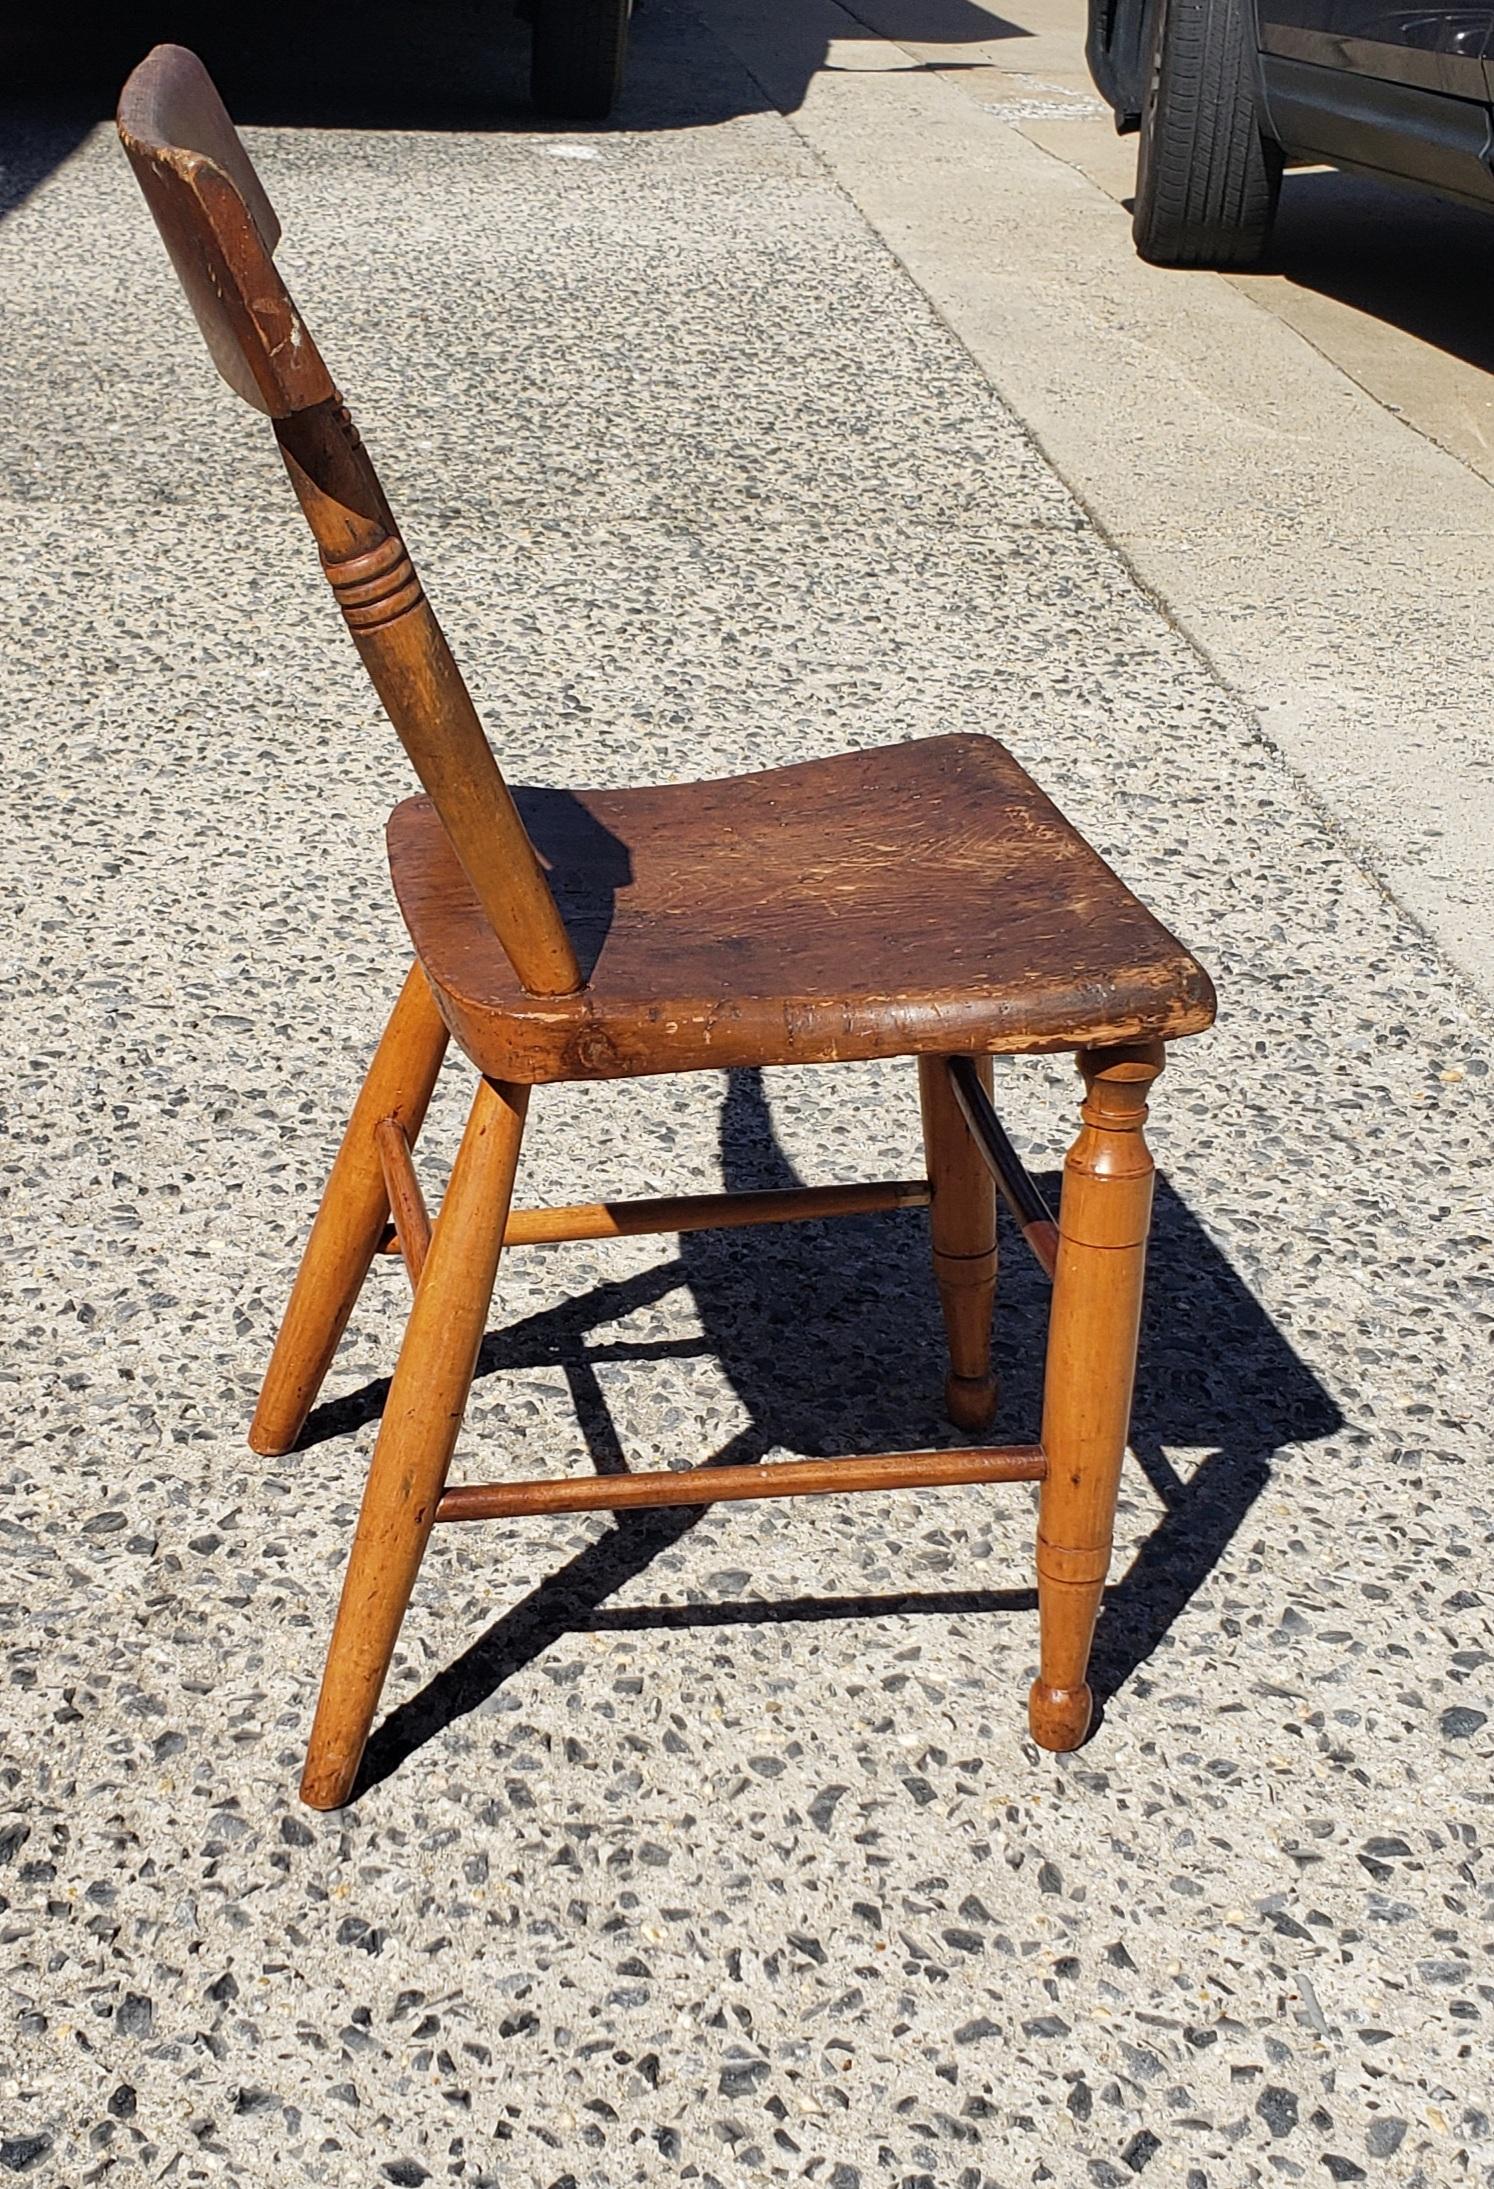 This is an antique primitive farmhouse chair circa late 19th century. The wooden chair features a plank seat with ladder back. Beautiful natural tone to the wood.